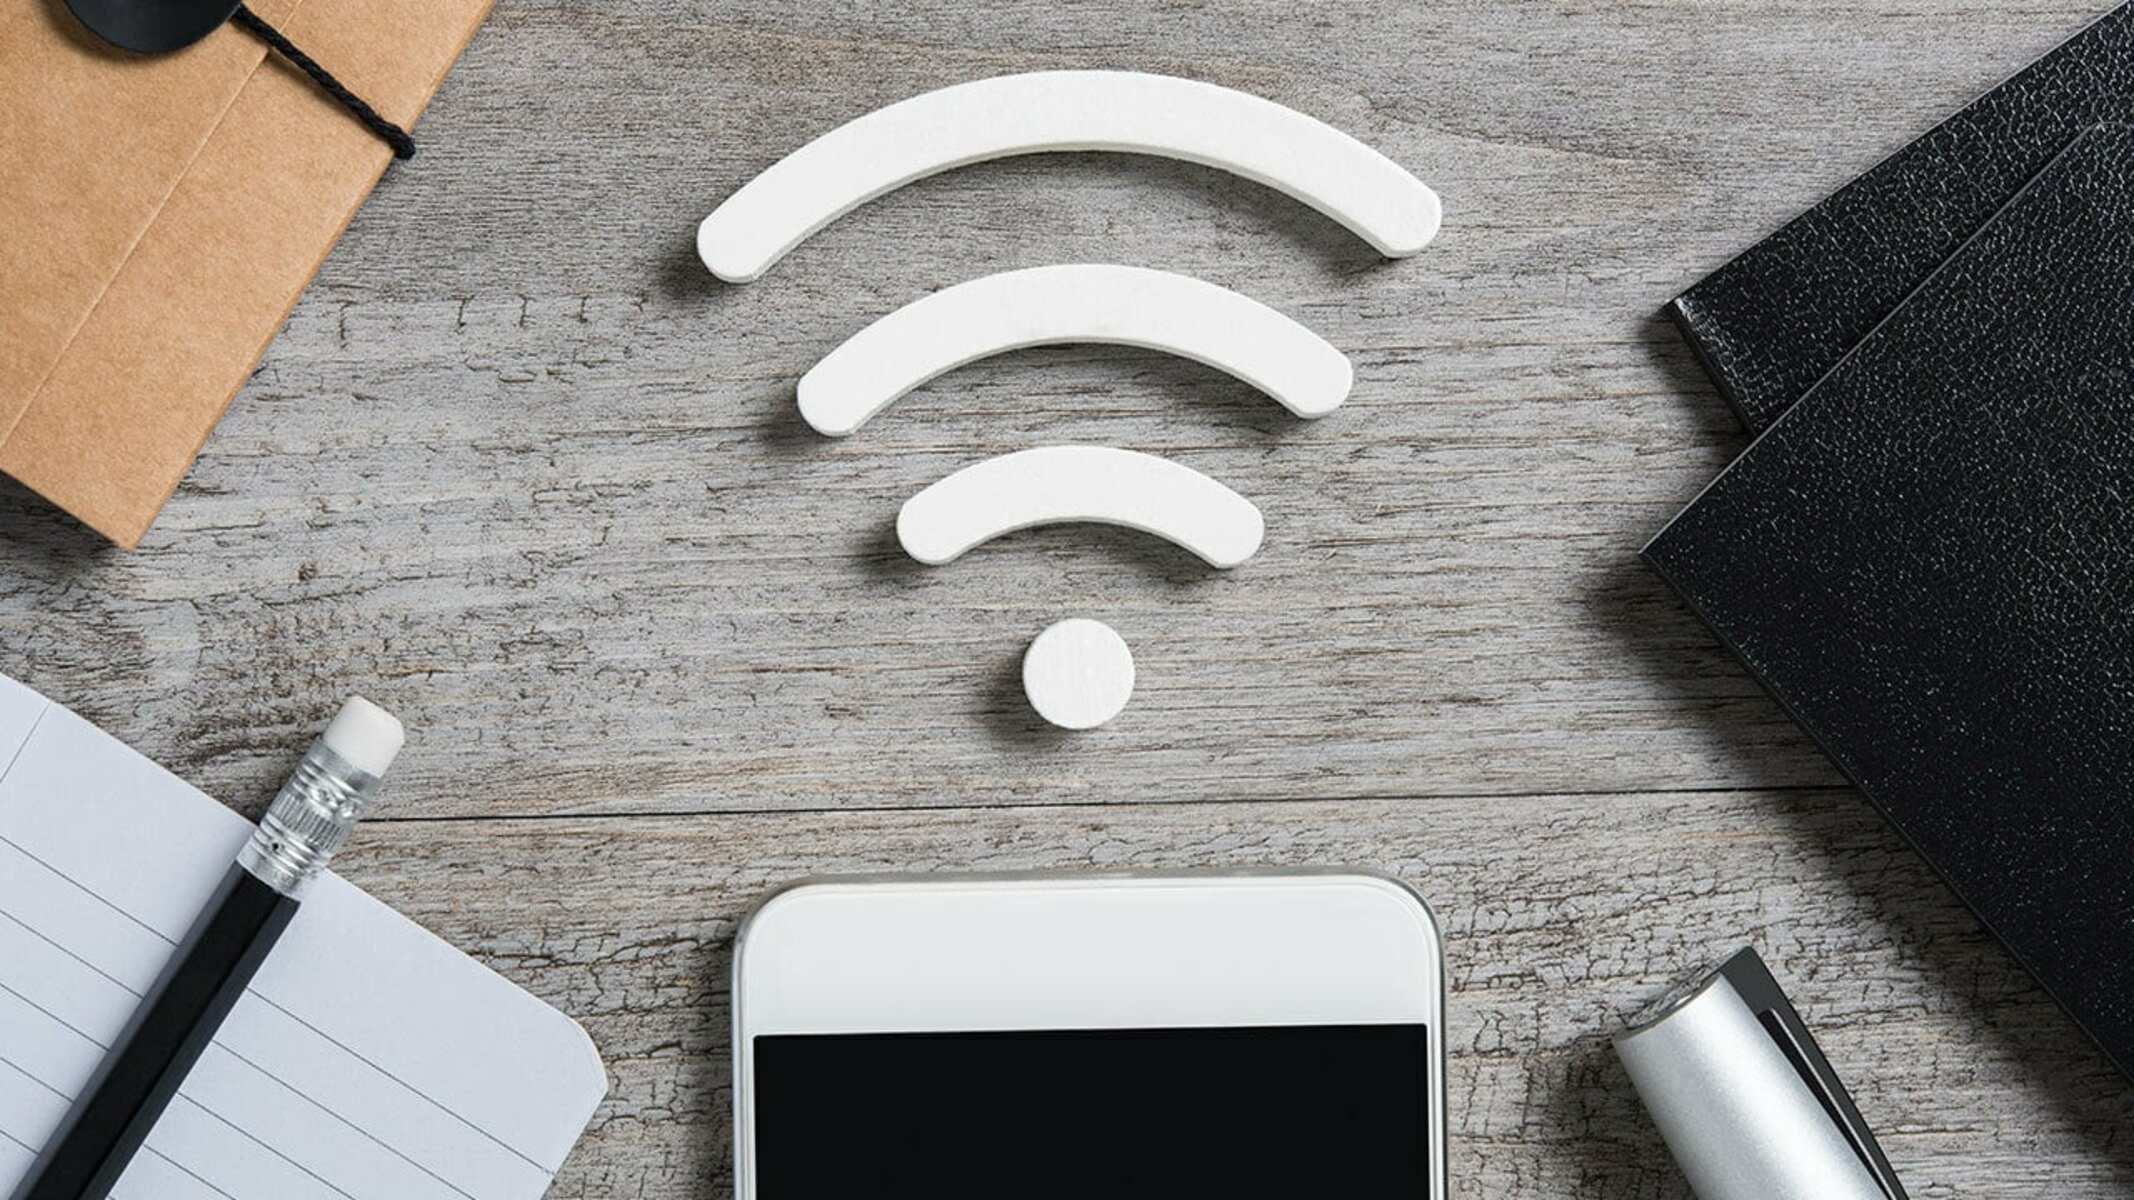 How To Make My Smartphone A Wi-Fi Hotspot